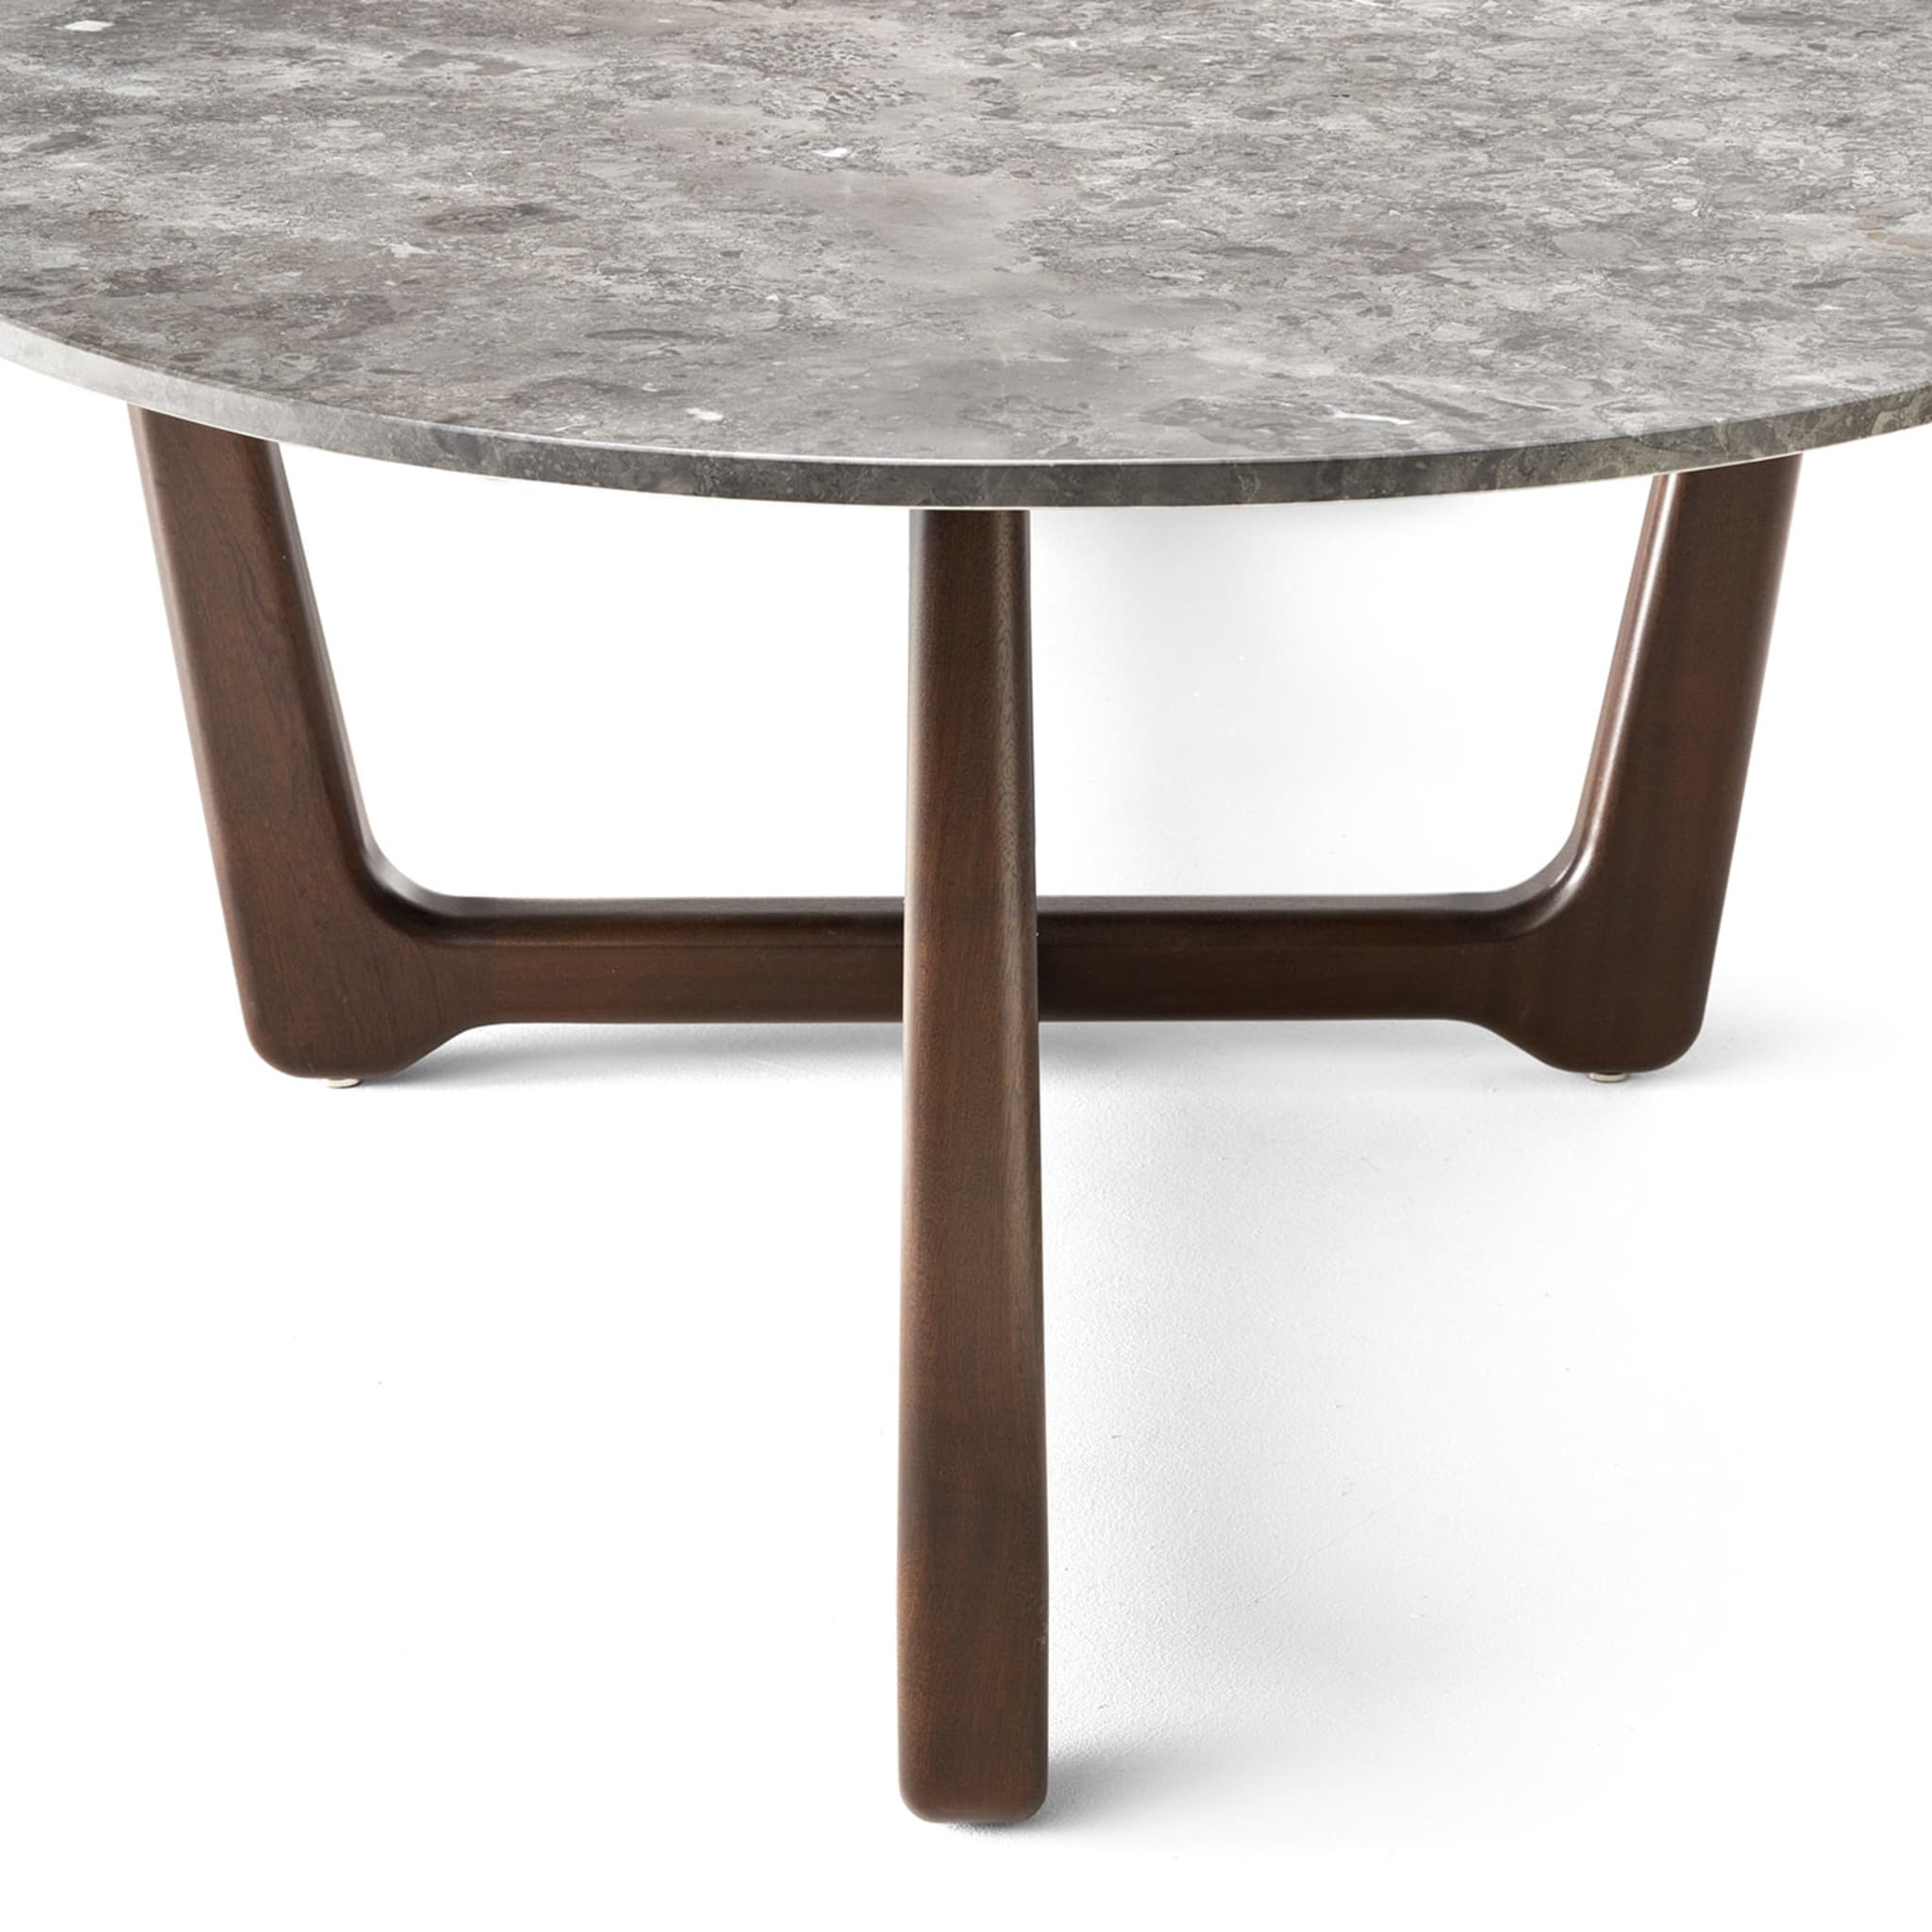 Sunset Oval Barrique + Sahara Grey Dining Table by Paola Navone - Alternative view 1